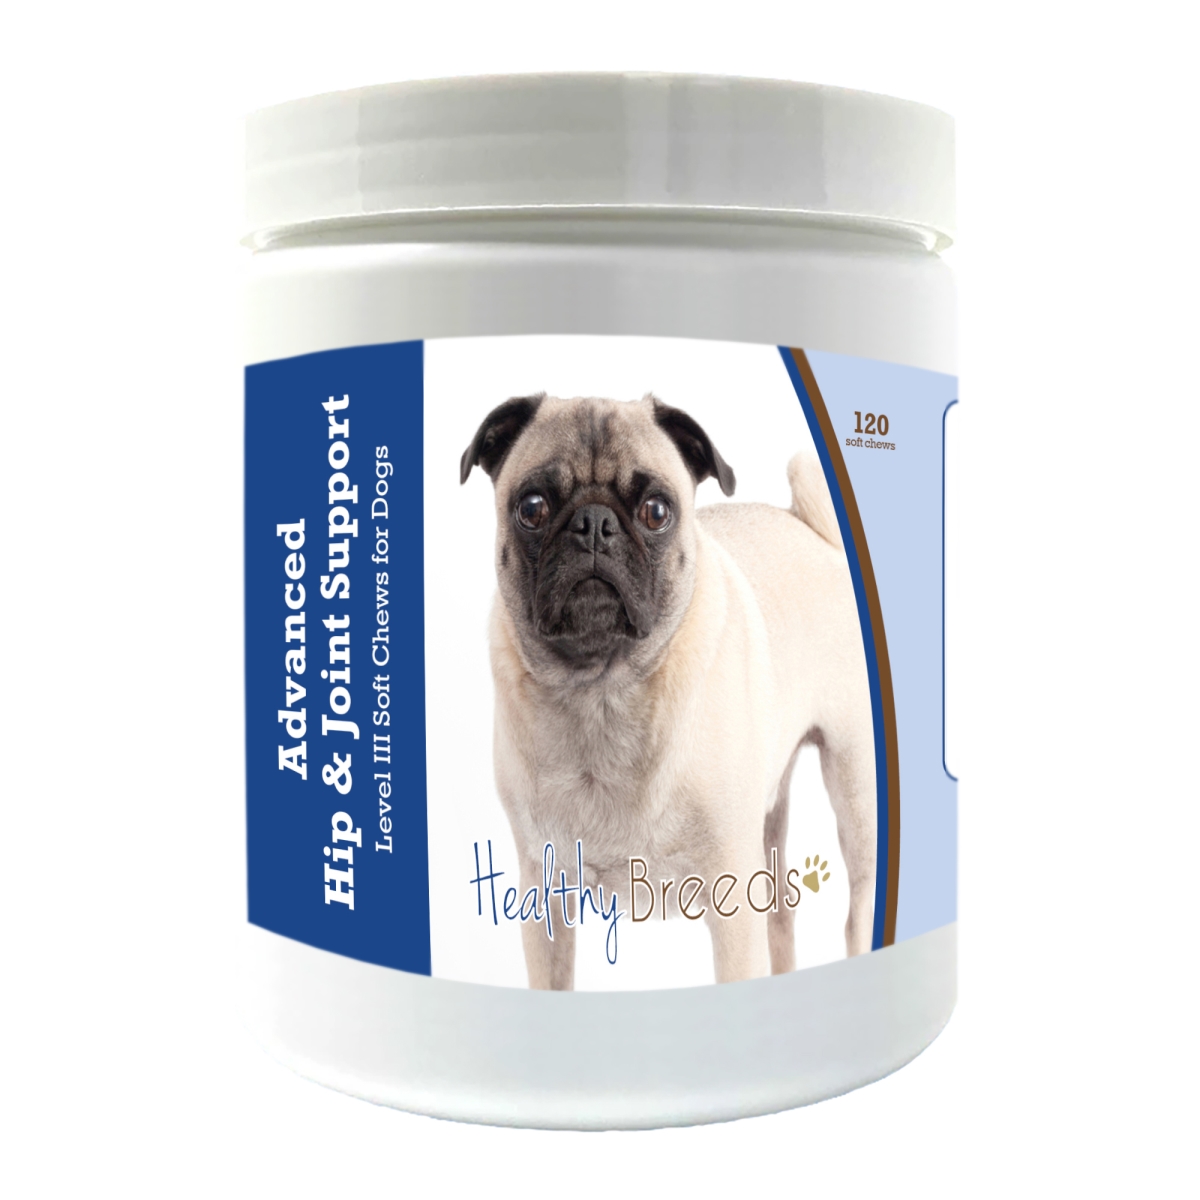 Picture of Healthy Breeds 192959899030 Pug Advanced Hip & Joint Support Level III Soft Chews for Dogs